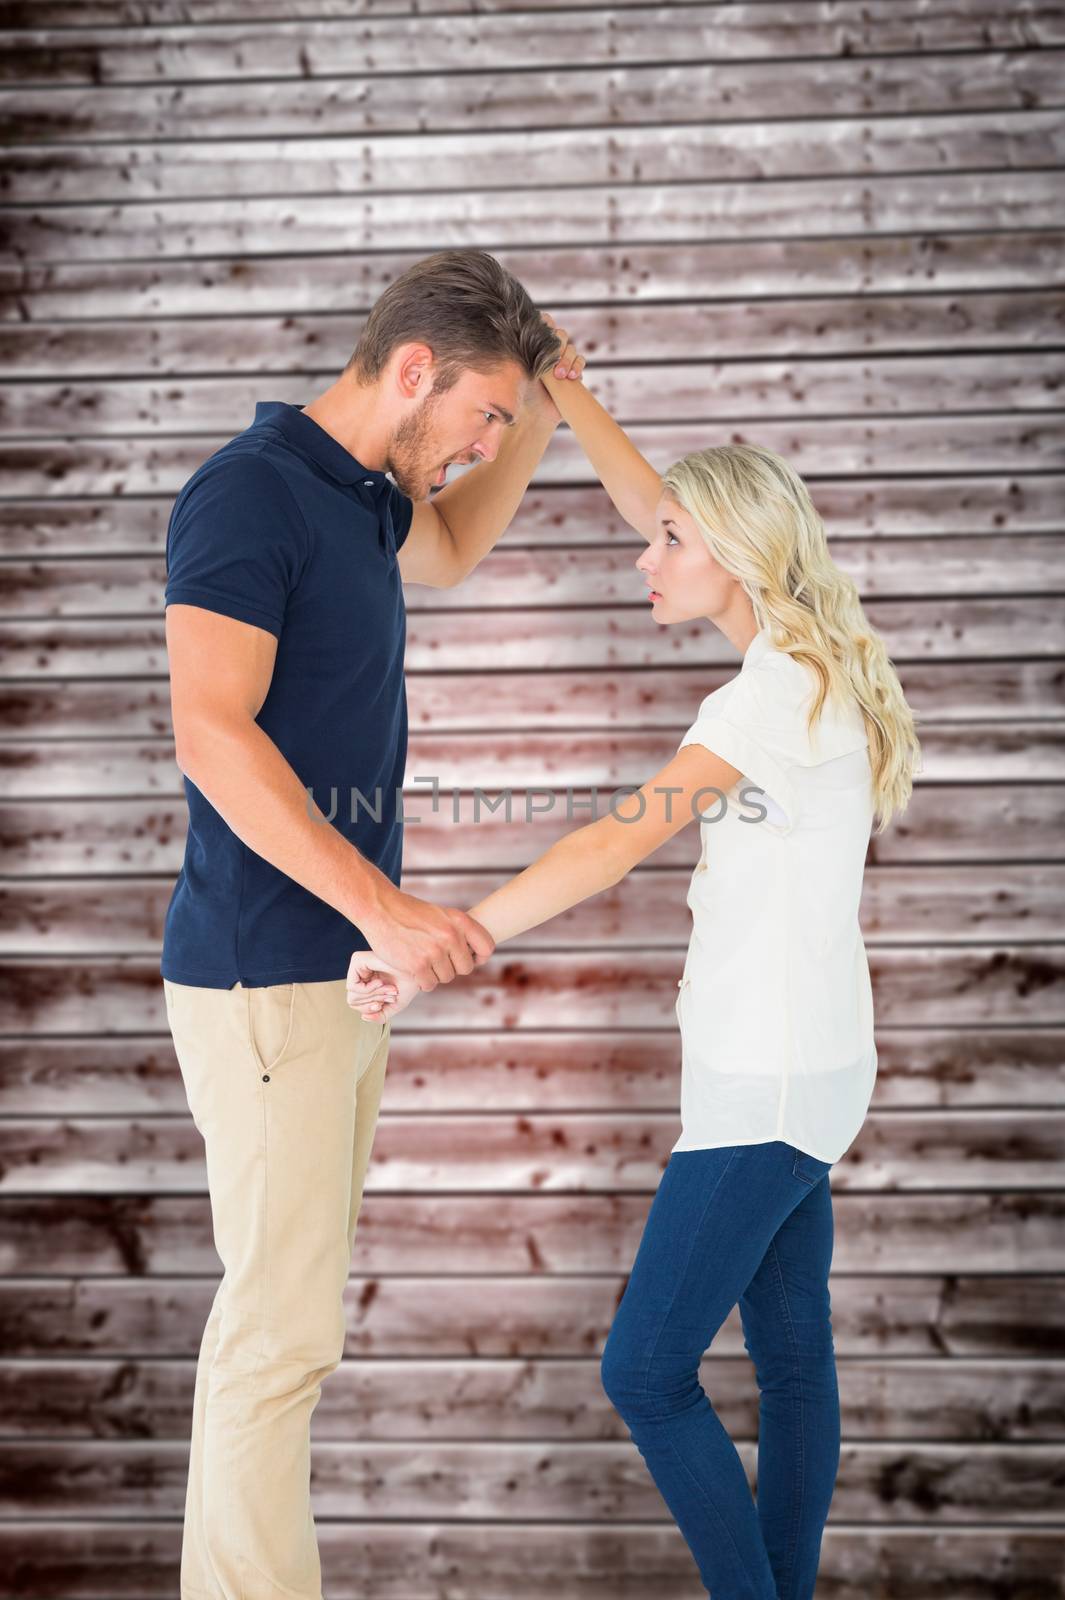 Angry man overpowering his girlfriend against wooden planks